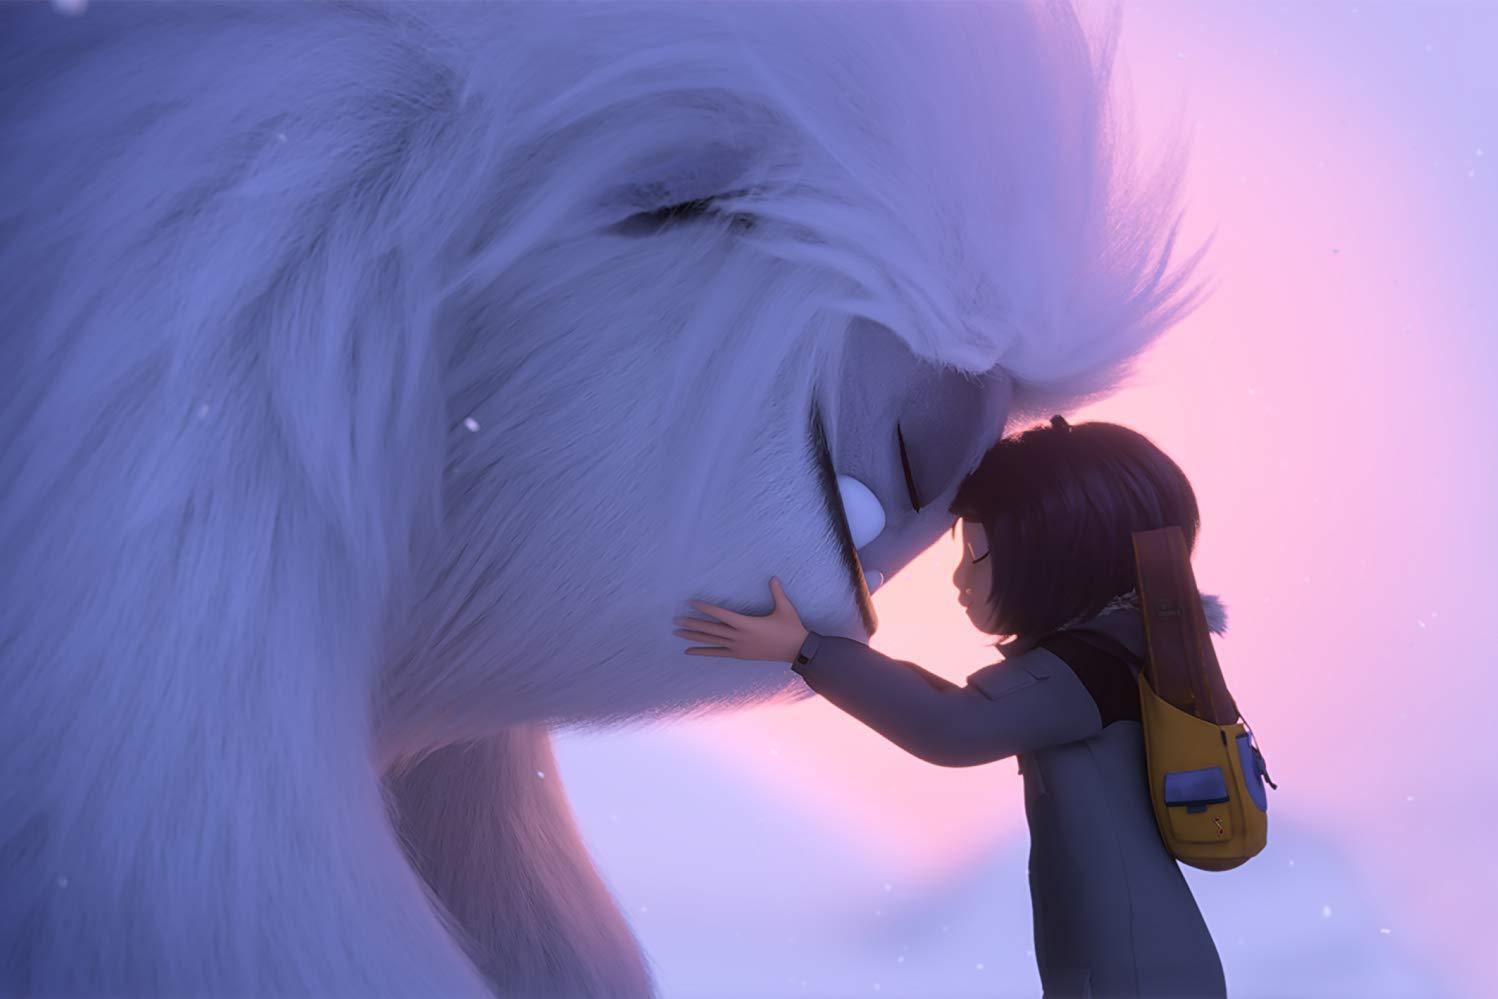 Abominable trailer: First look at new Dreamworks animation reveals